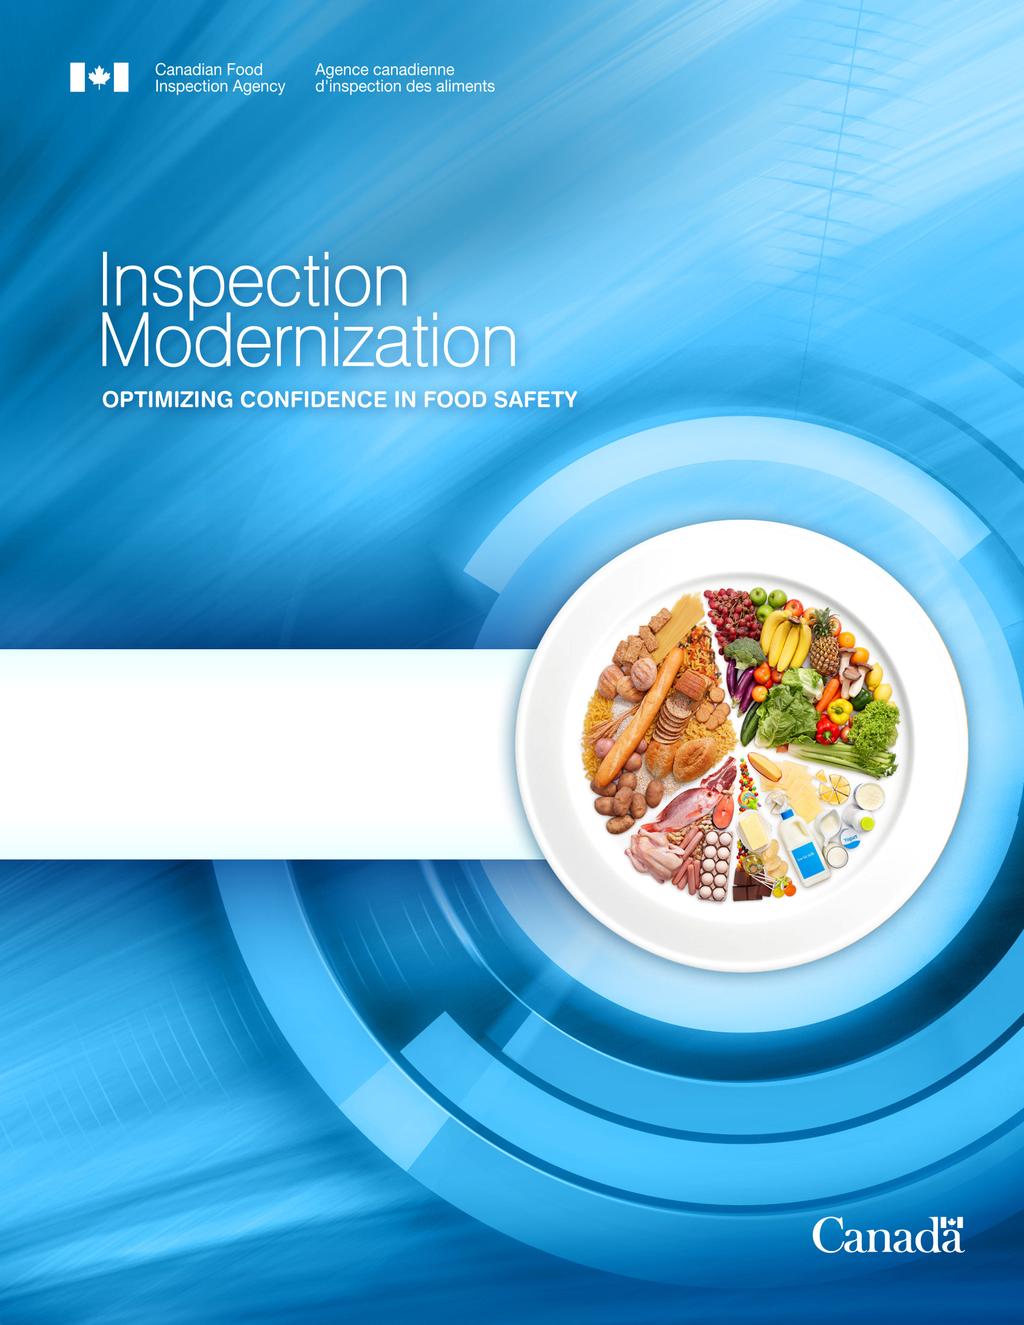 What We Heard Report Inspection Modernization: The Case for Change